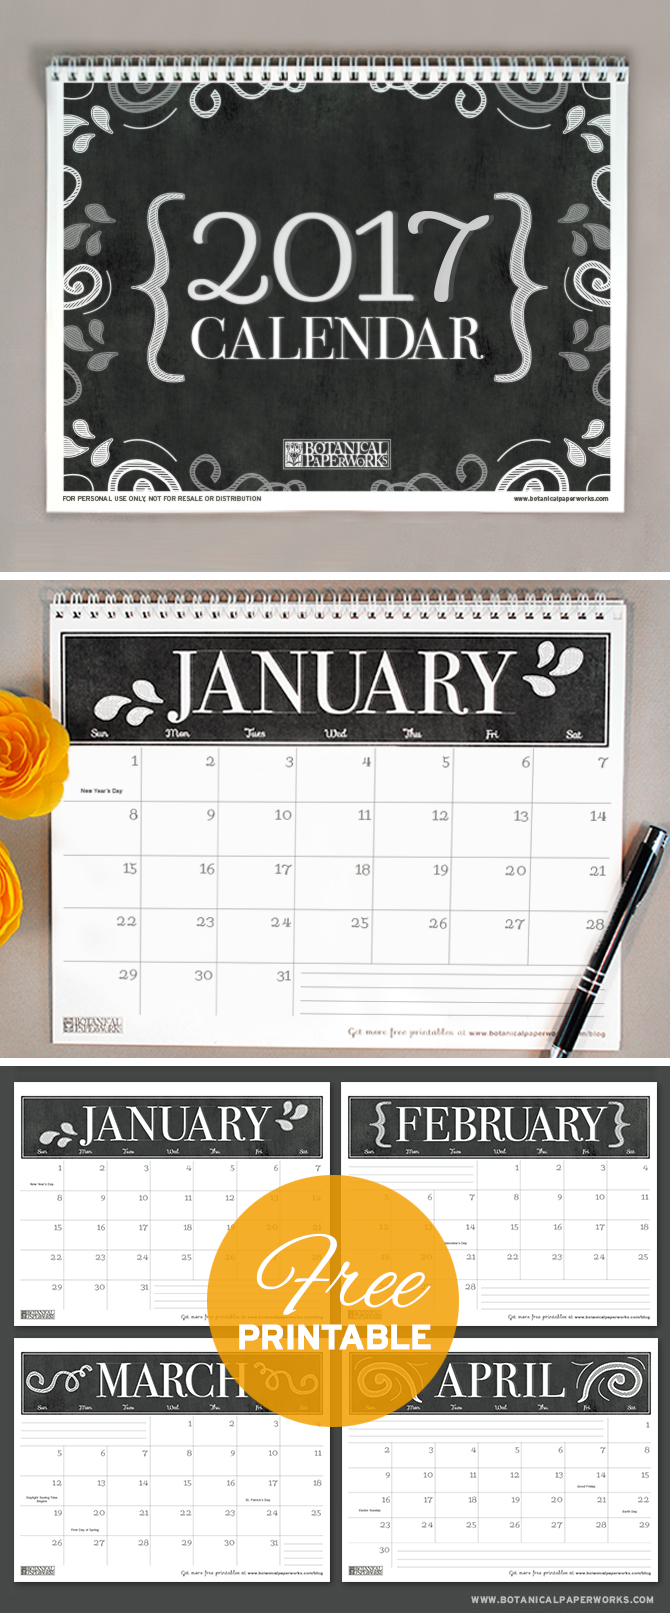 With a sophisticated black and white chalkboard design, this 2017 free printable calendar is perfect for home or office use. See more designs and download your favorite 2017 calendar on our blog!